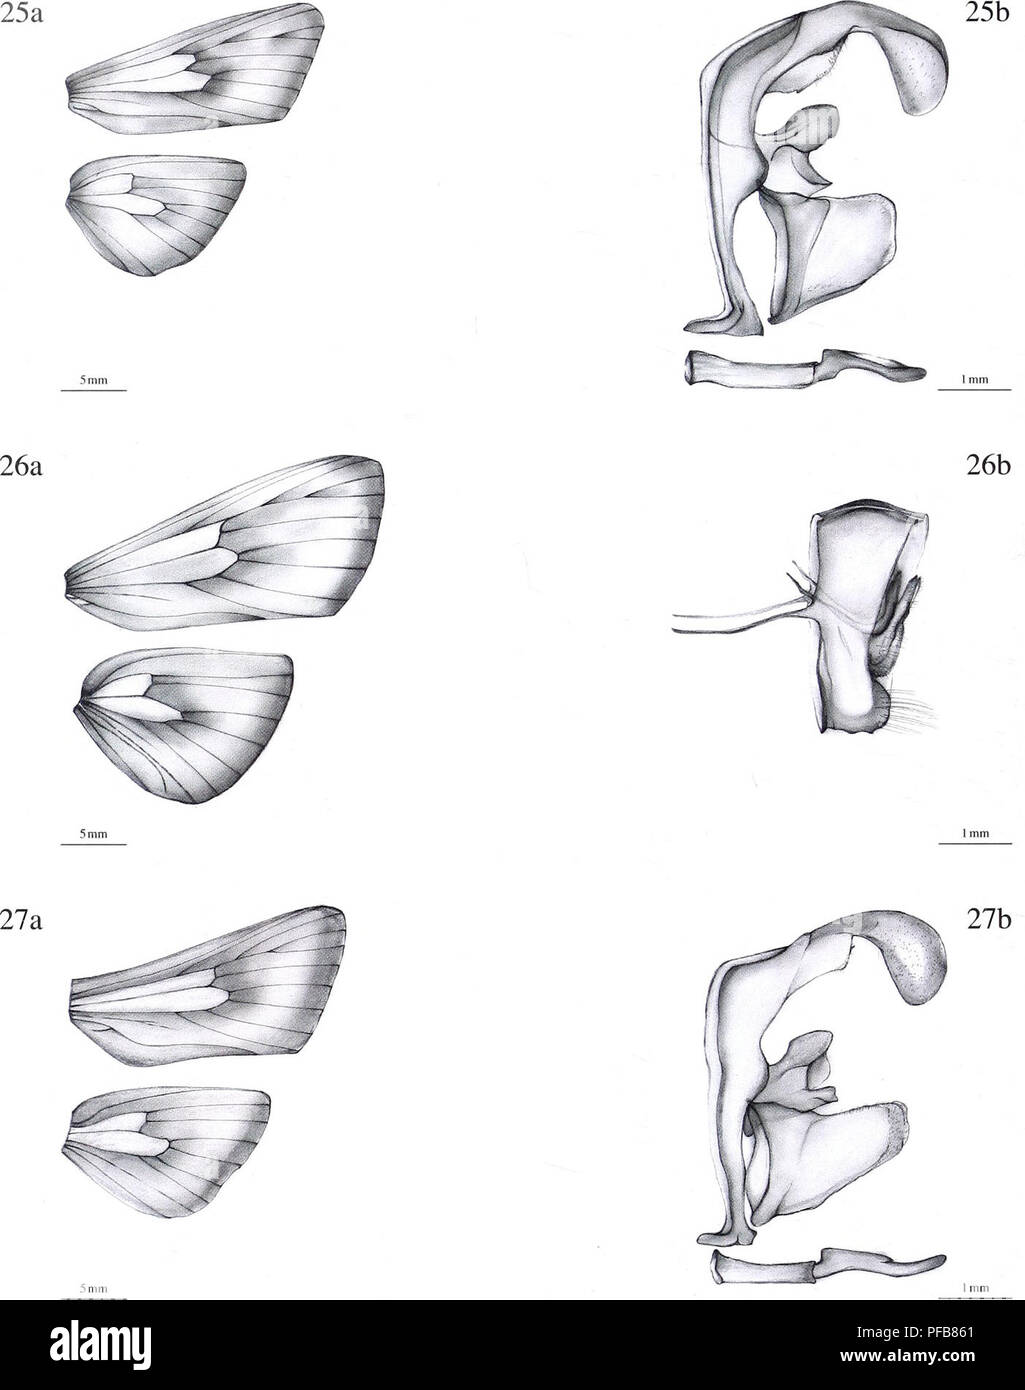 . The description of a new genus and twenty-three new species of Metarbelidae (Lepidoptera : Cossoidea) from the lowland tropical rain forests of the Guineo-Congolian Region with notes on habitats and biogeography / Ingo Lehmannn. 56. Figure 25a. Wing venation of: Haberlandia janzi spec, nov., male, holotype. 26a. Haberlandia tempeli spec, nov., female, holotype. 27a. Haberlandia taiensis spec, nov., male, holotype. Figure 25b. Genitalia of: Haberlandia janzi spec, nov., male, holotype. 26b. Haberlandia tempeli spec, nov., female, holotype. 27b. Haberlandia taiensis spec, nov., male, holotype. Stock Photo